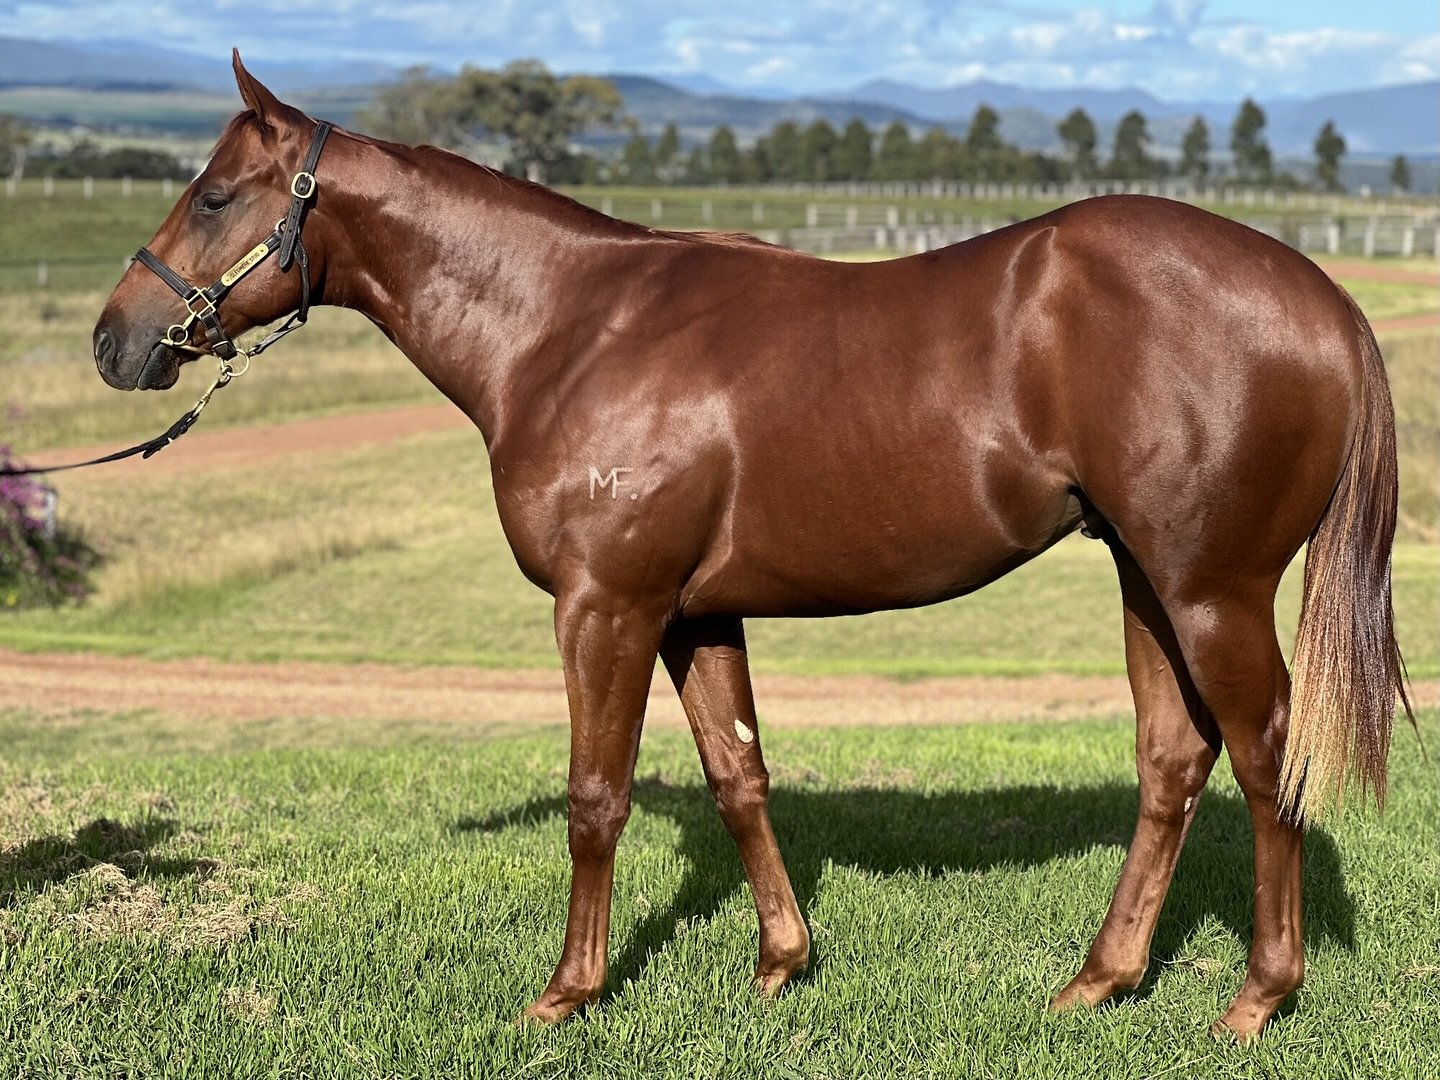 SOLD-All shares gone in 24 hours😮
This game is full of surprises, and this time it&rsquo;s a pleasant surprise! 
The Zousain Colt represented HUGE value who basically sold himself. Congratulations to @trilogyracing and everyone who got in early to s